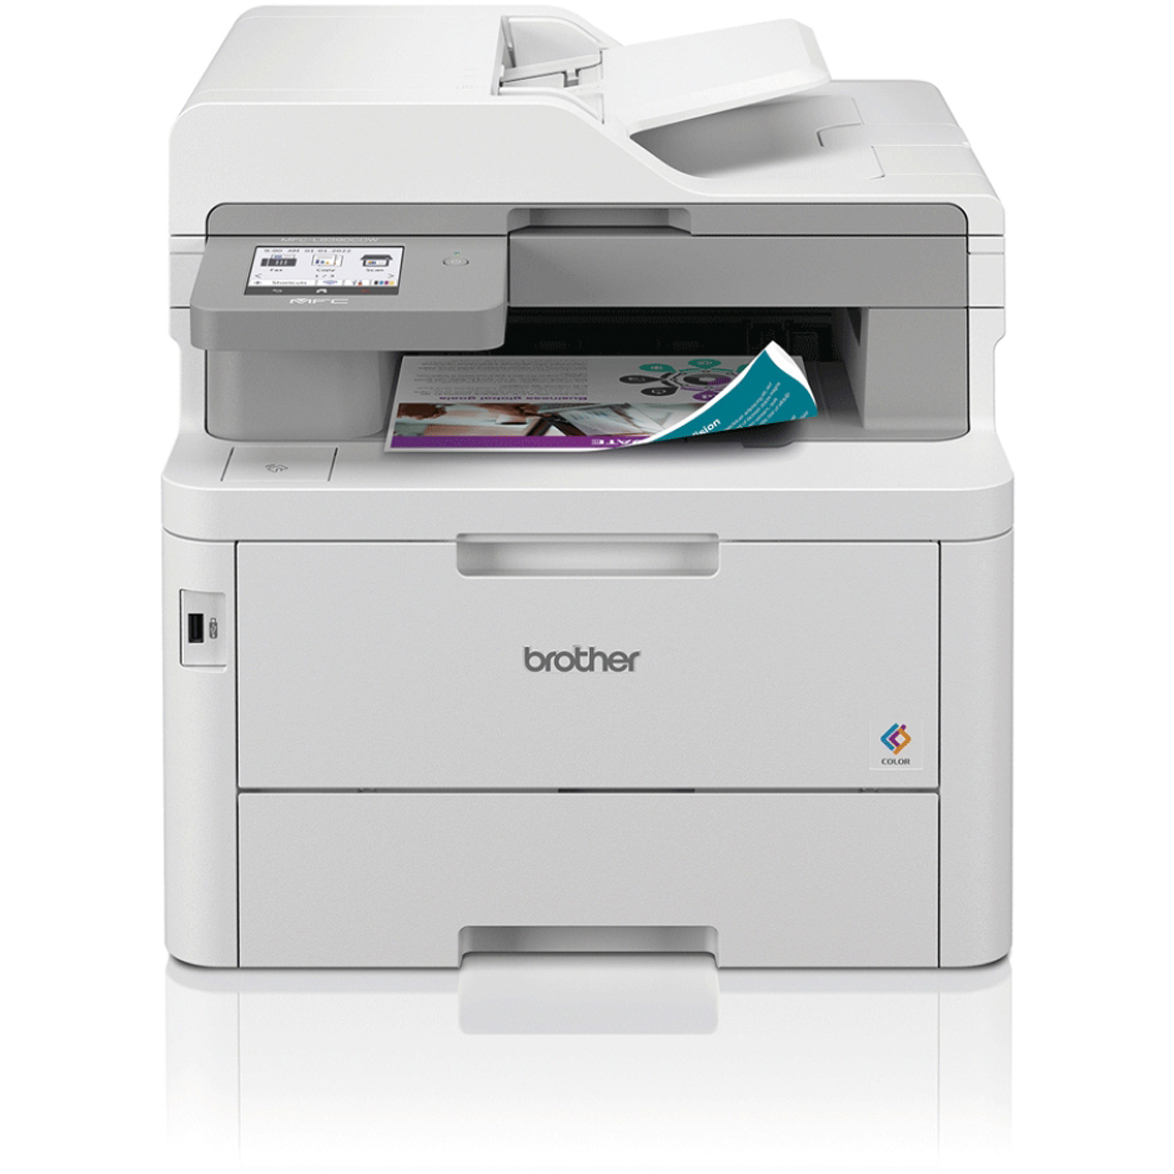 Original Brother Mfc-L8390Cdw Compact A4 Colour Led All-In-1 Laser Printer (MFCL8390CDWQJ1)